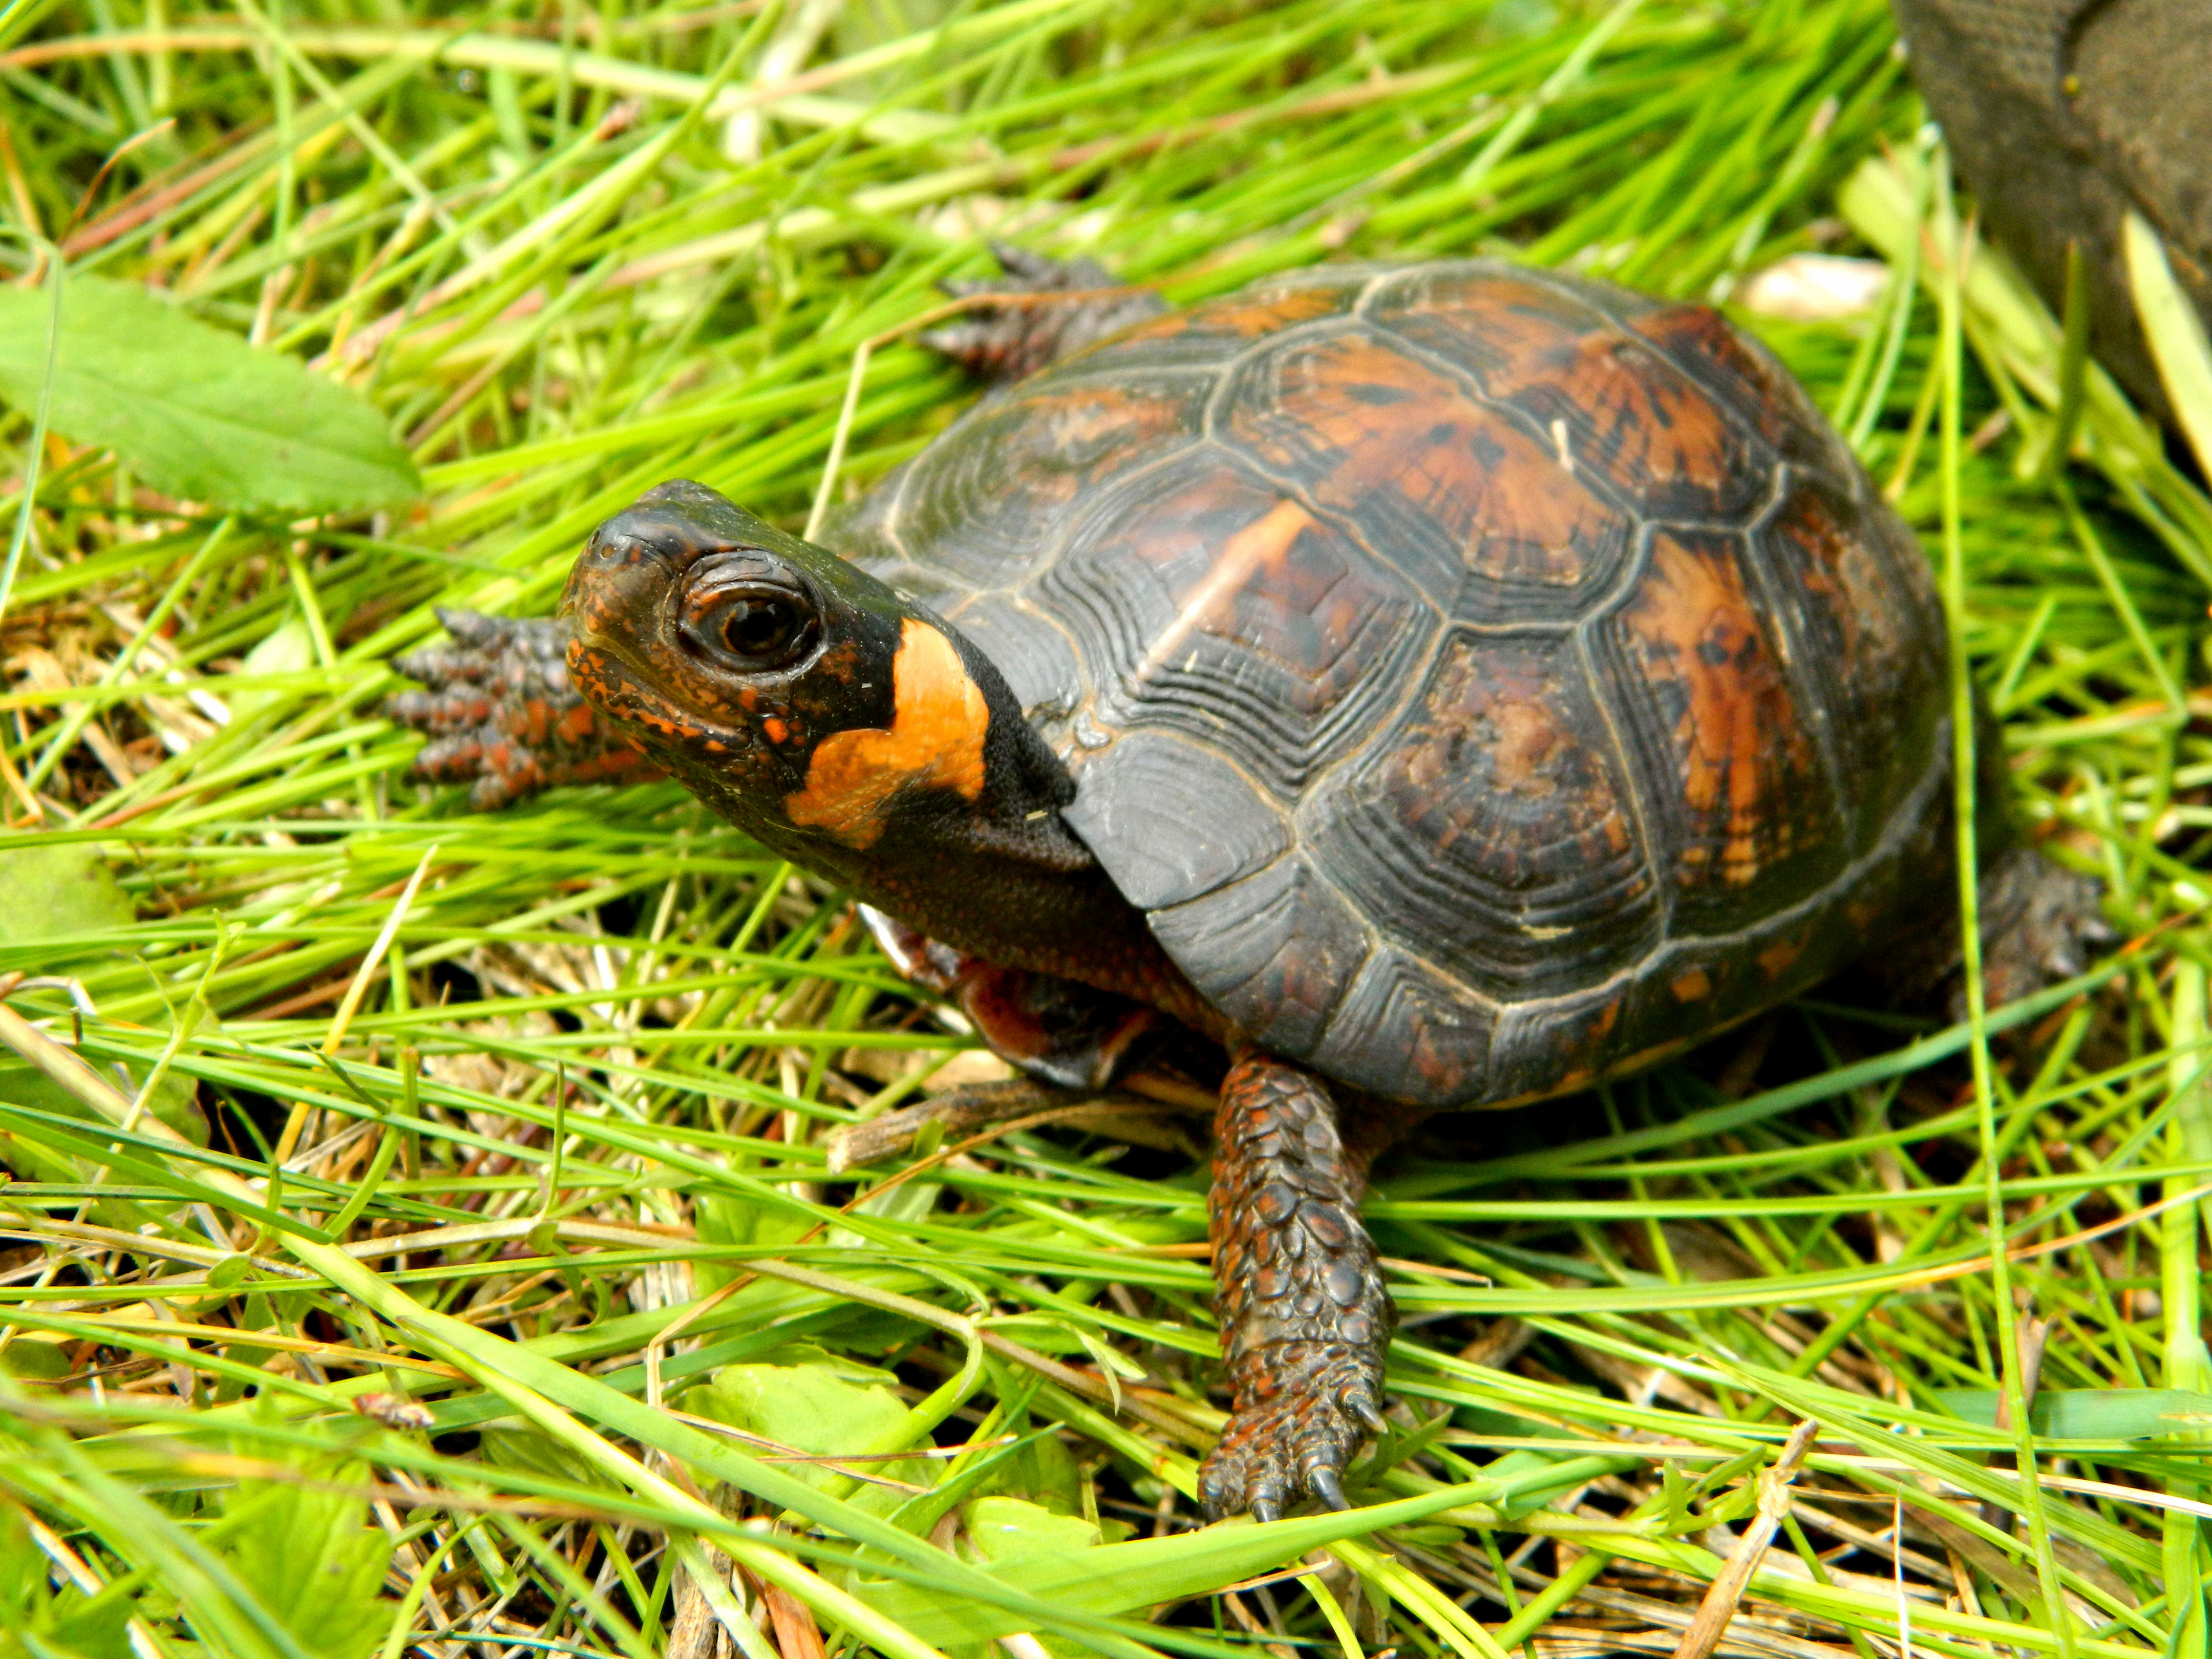 A close up image of a brown and orange colors Bog Turtle in bright green grass.